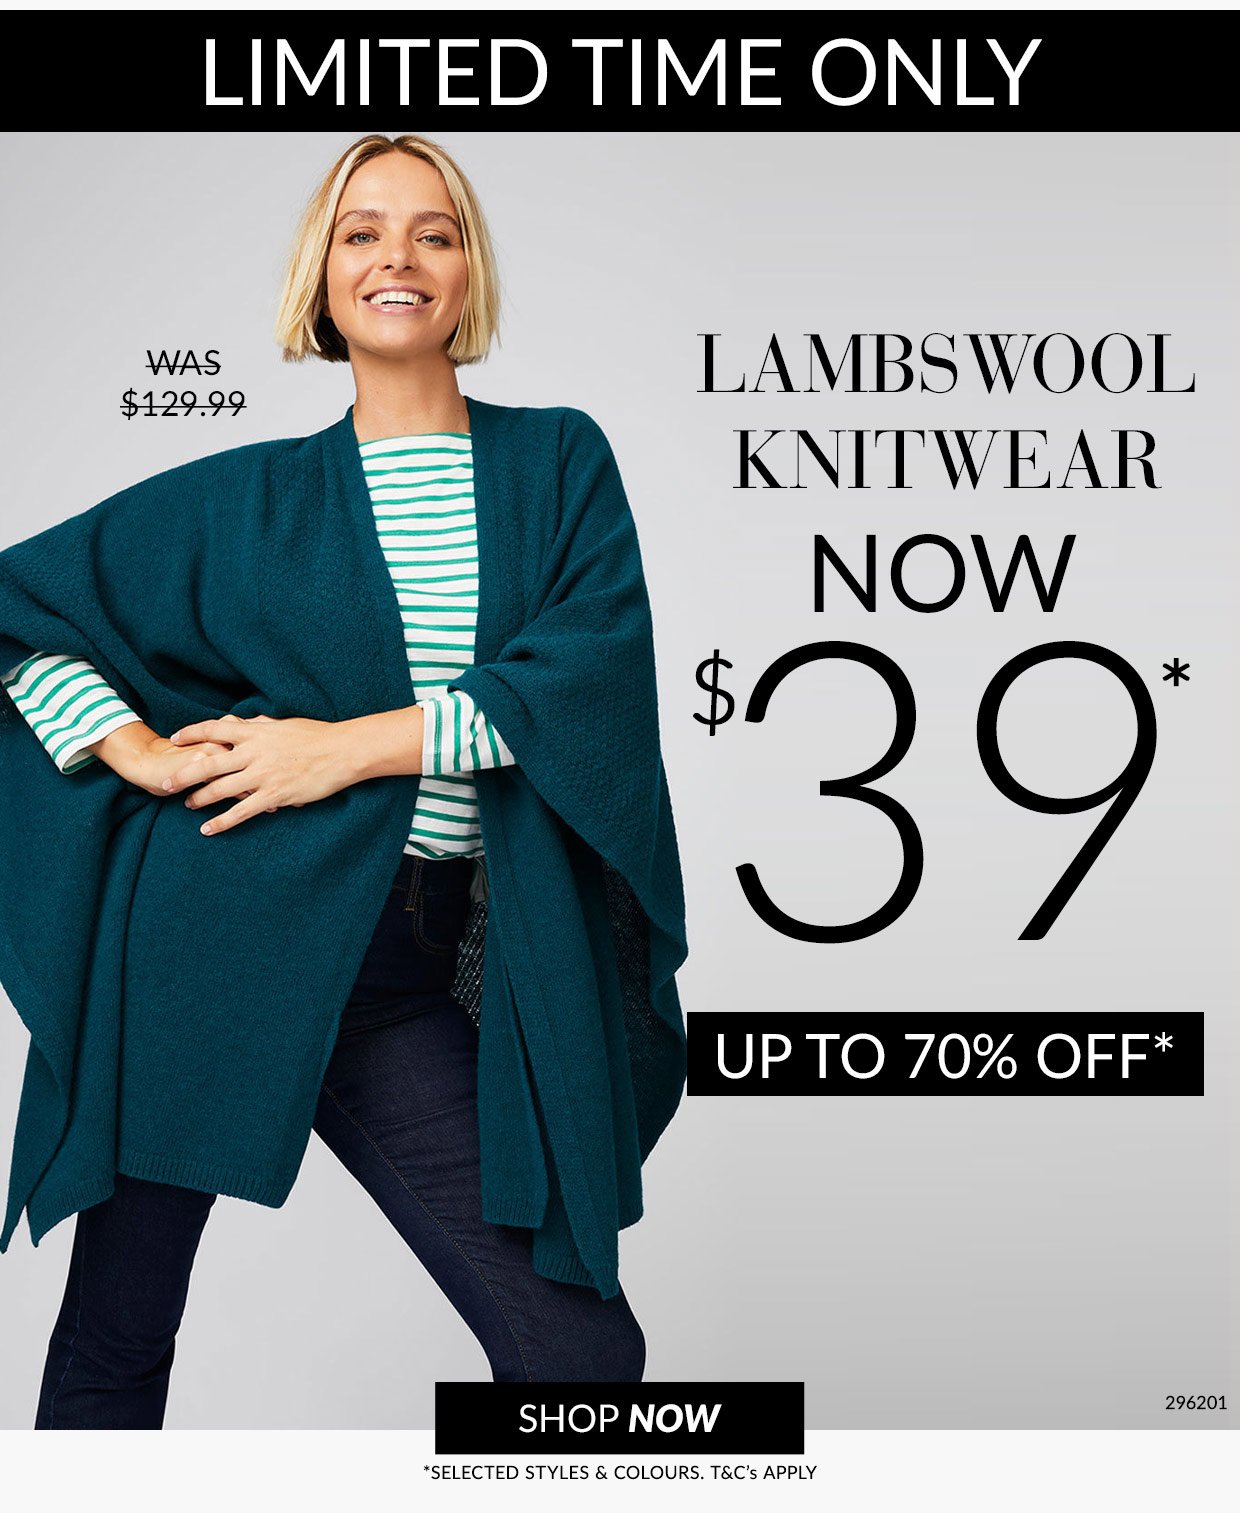 Limited Time Only | $39 Lambswool Knitwear UP TO 70% OFF